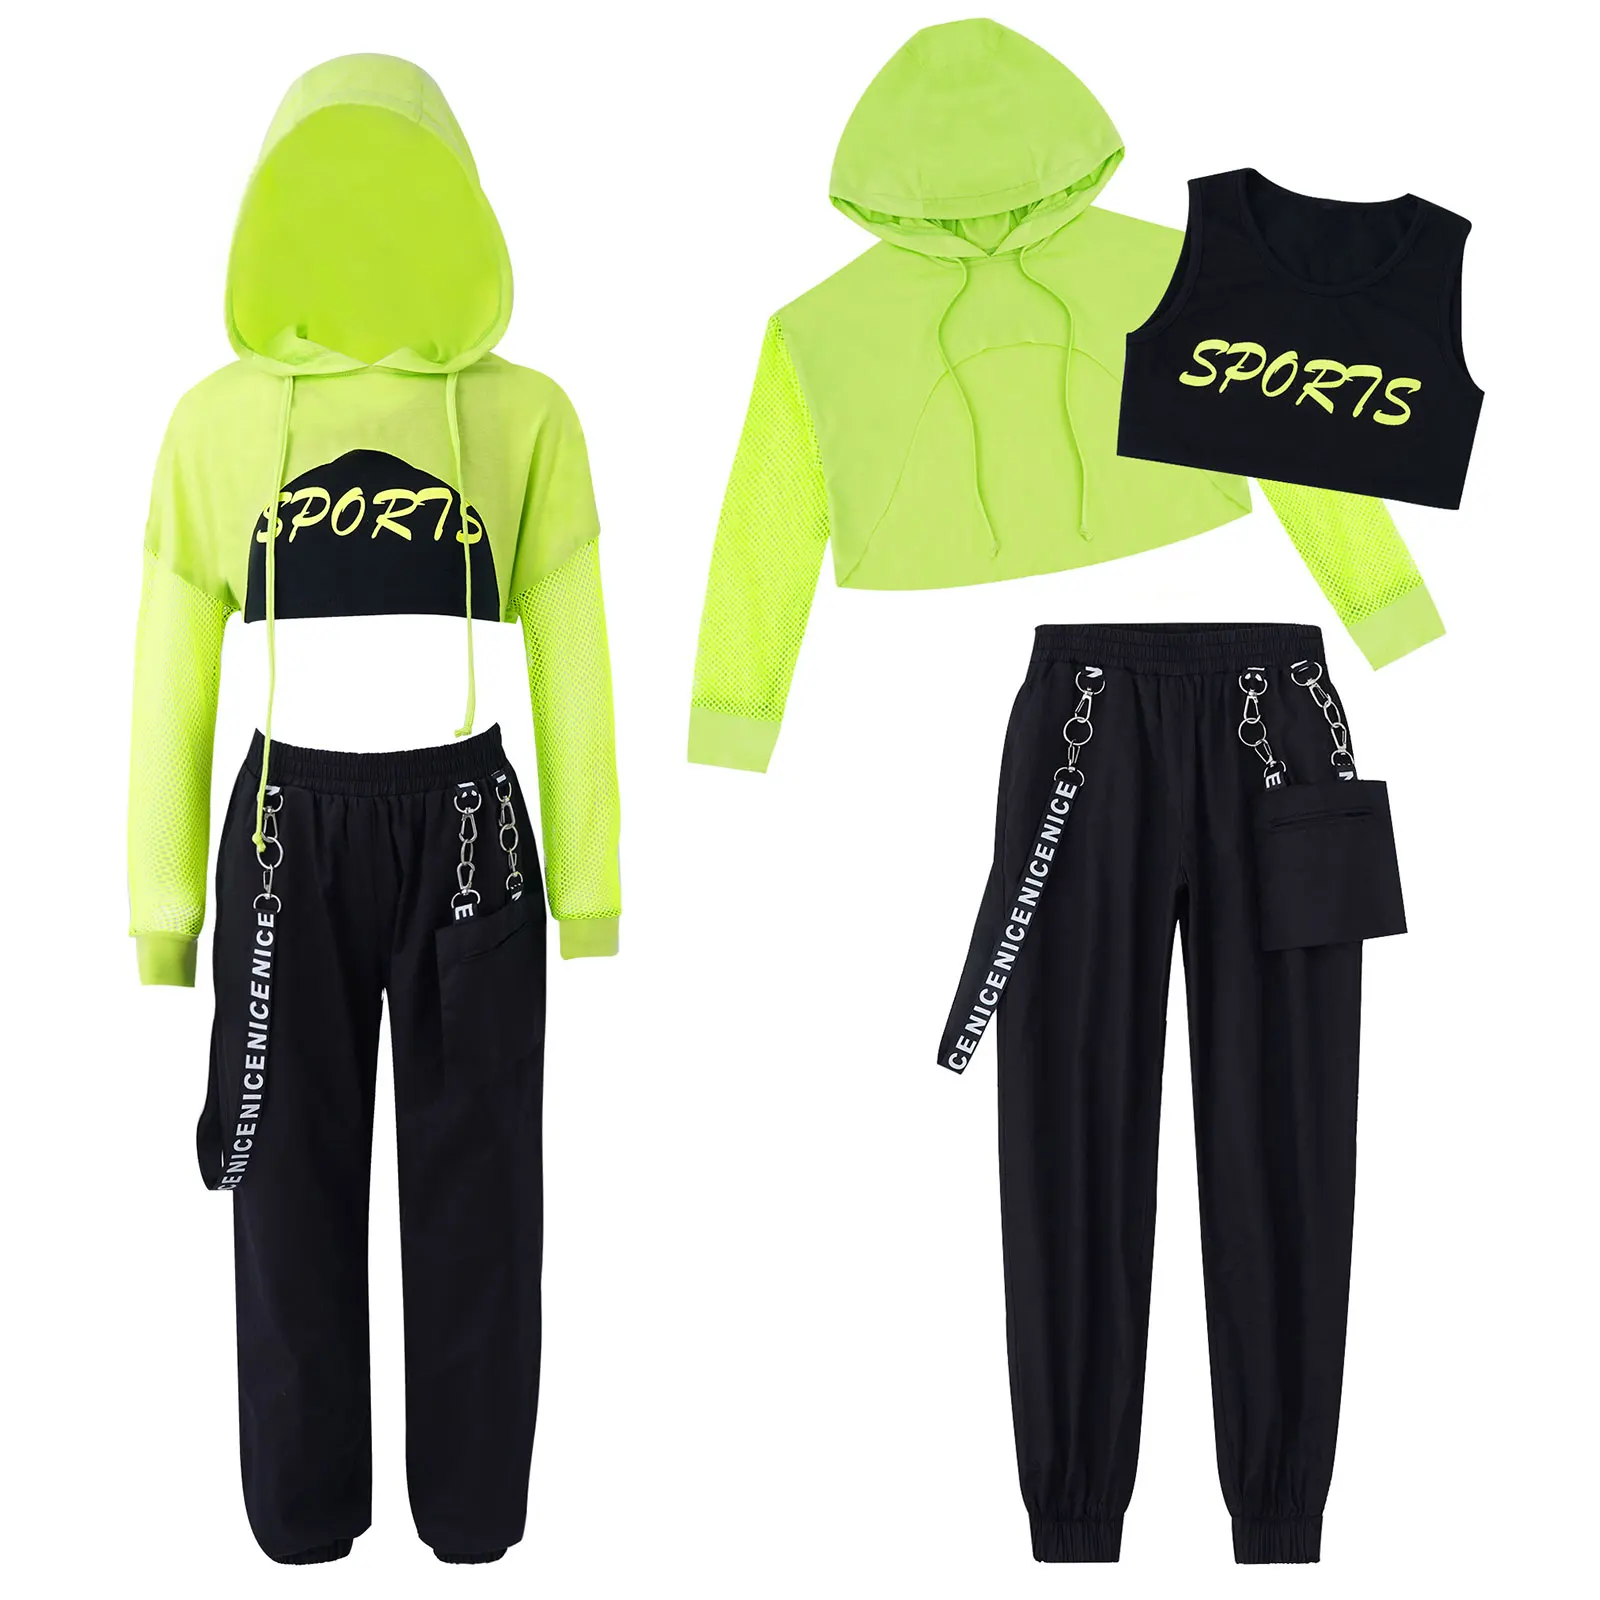 Hip Hop Girls Clothing Jazz Costumes Kids Hooded Net Cover Up Tops With Crop Vest And Pants Sports Set Modern Dance Street Wear